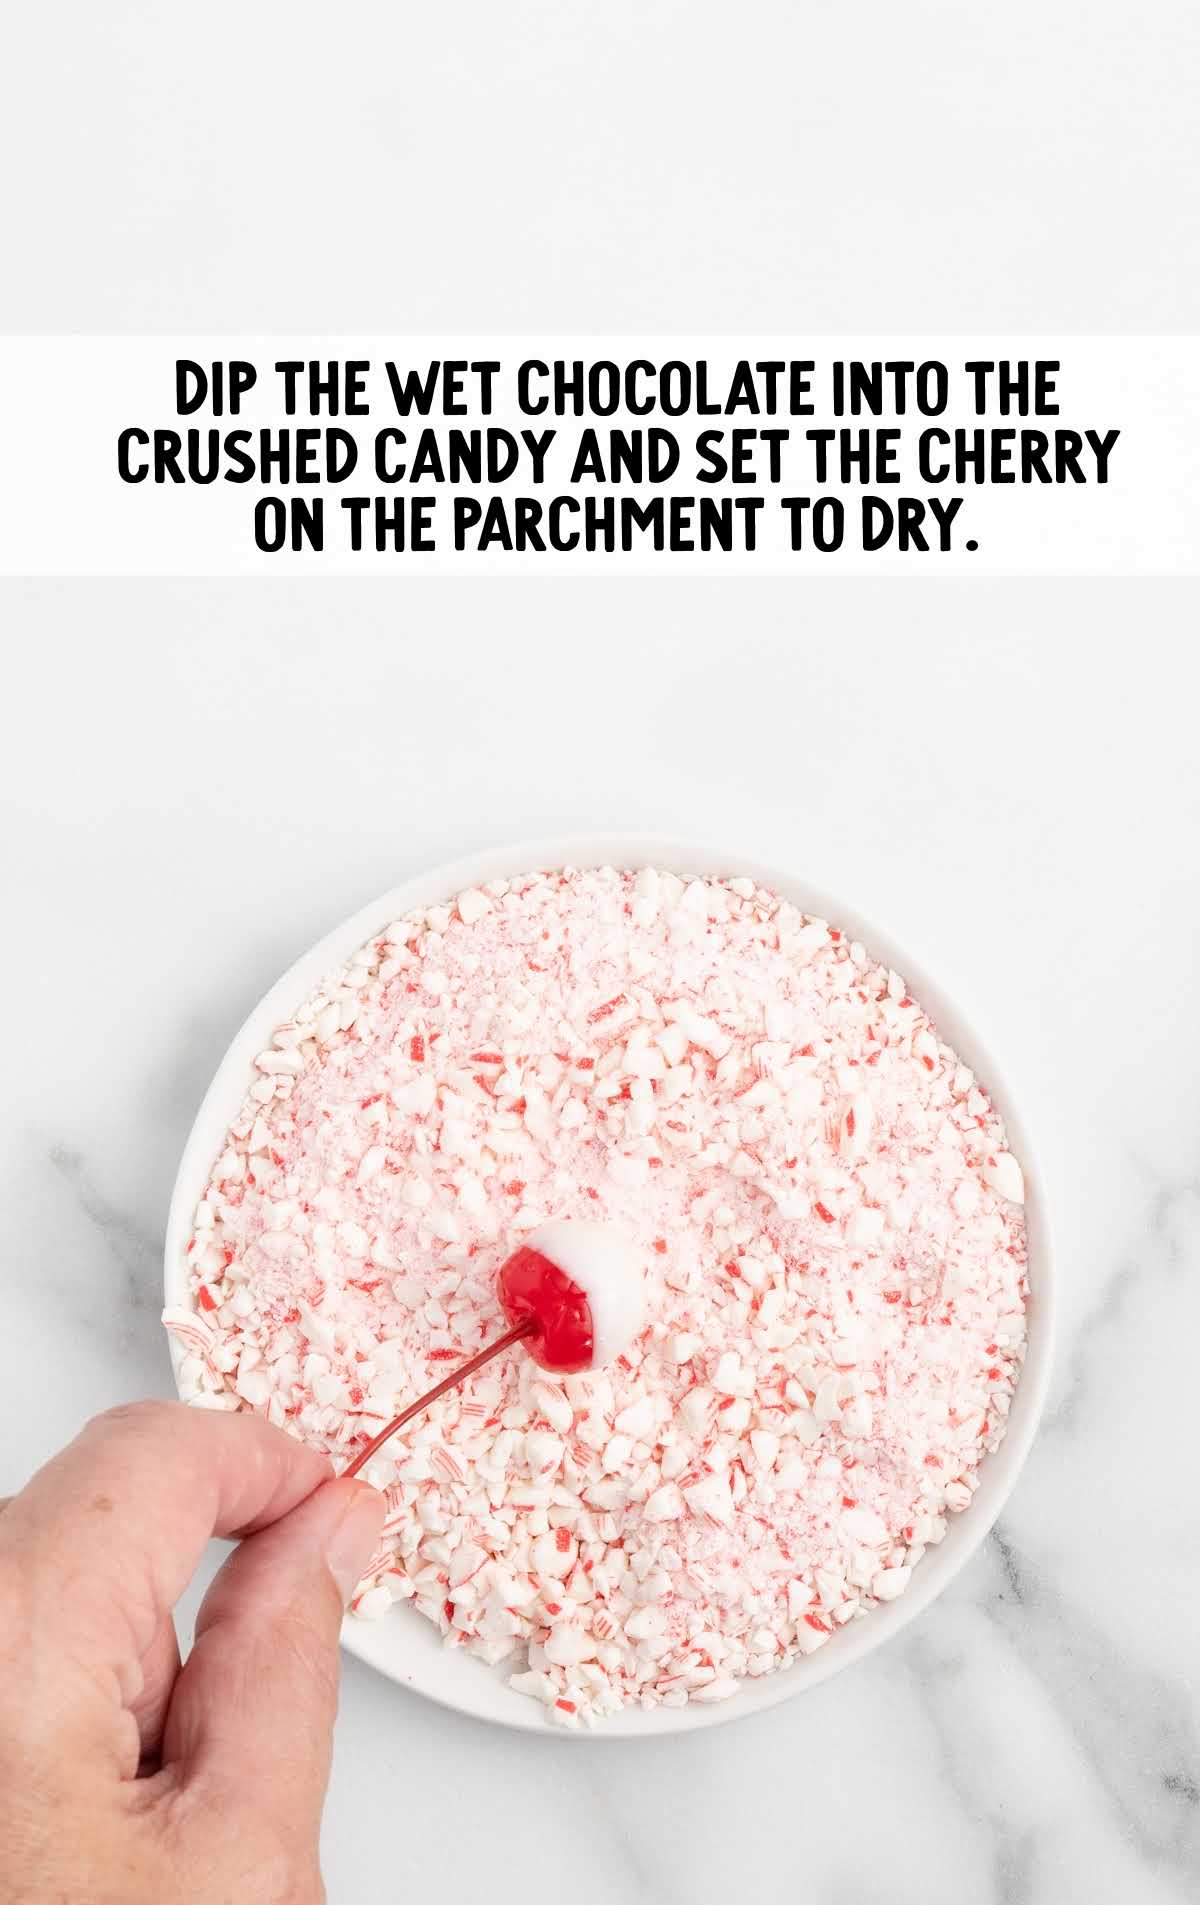 wet chocolate dipped into the crushed candy and set cherry on the parchment to dry